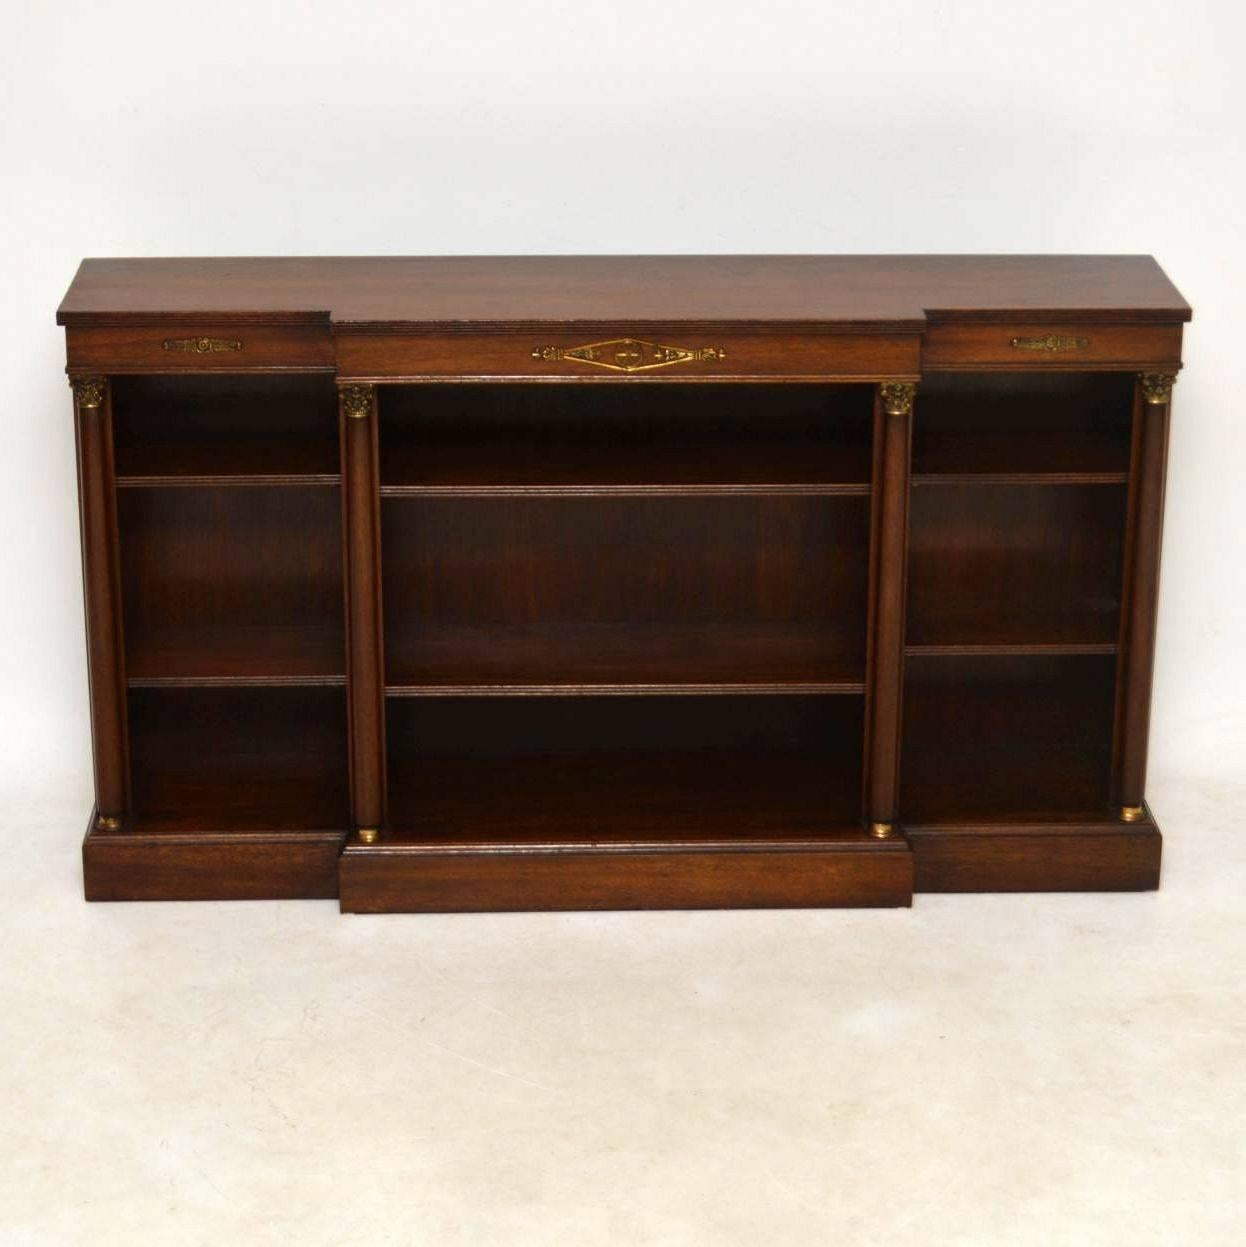 Antique Regency style mahogany breakfront open bookcase with adjustable shelves. This bookcase has all the typical neoclassical features, in the design of the gilt bronze mounts and the Corinthian columns. It's polished mahogany inside and out. The